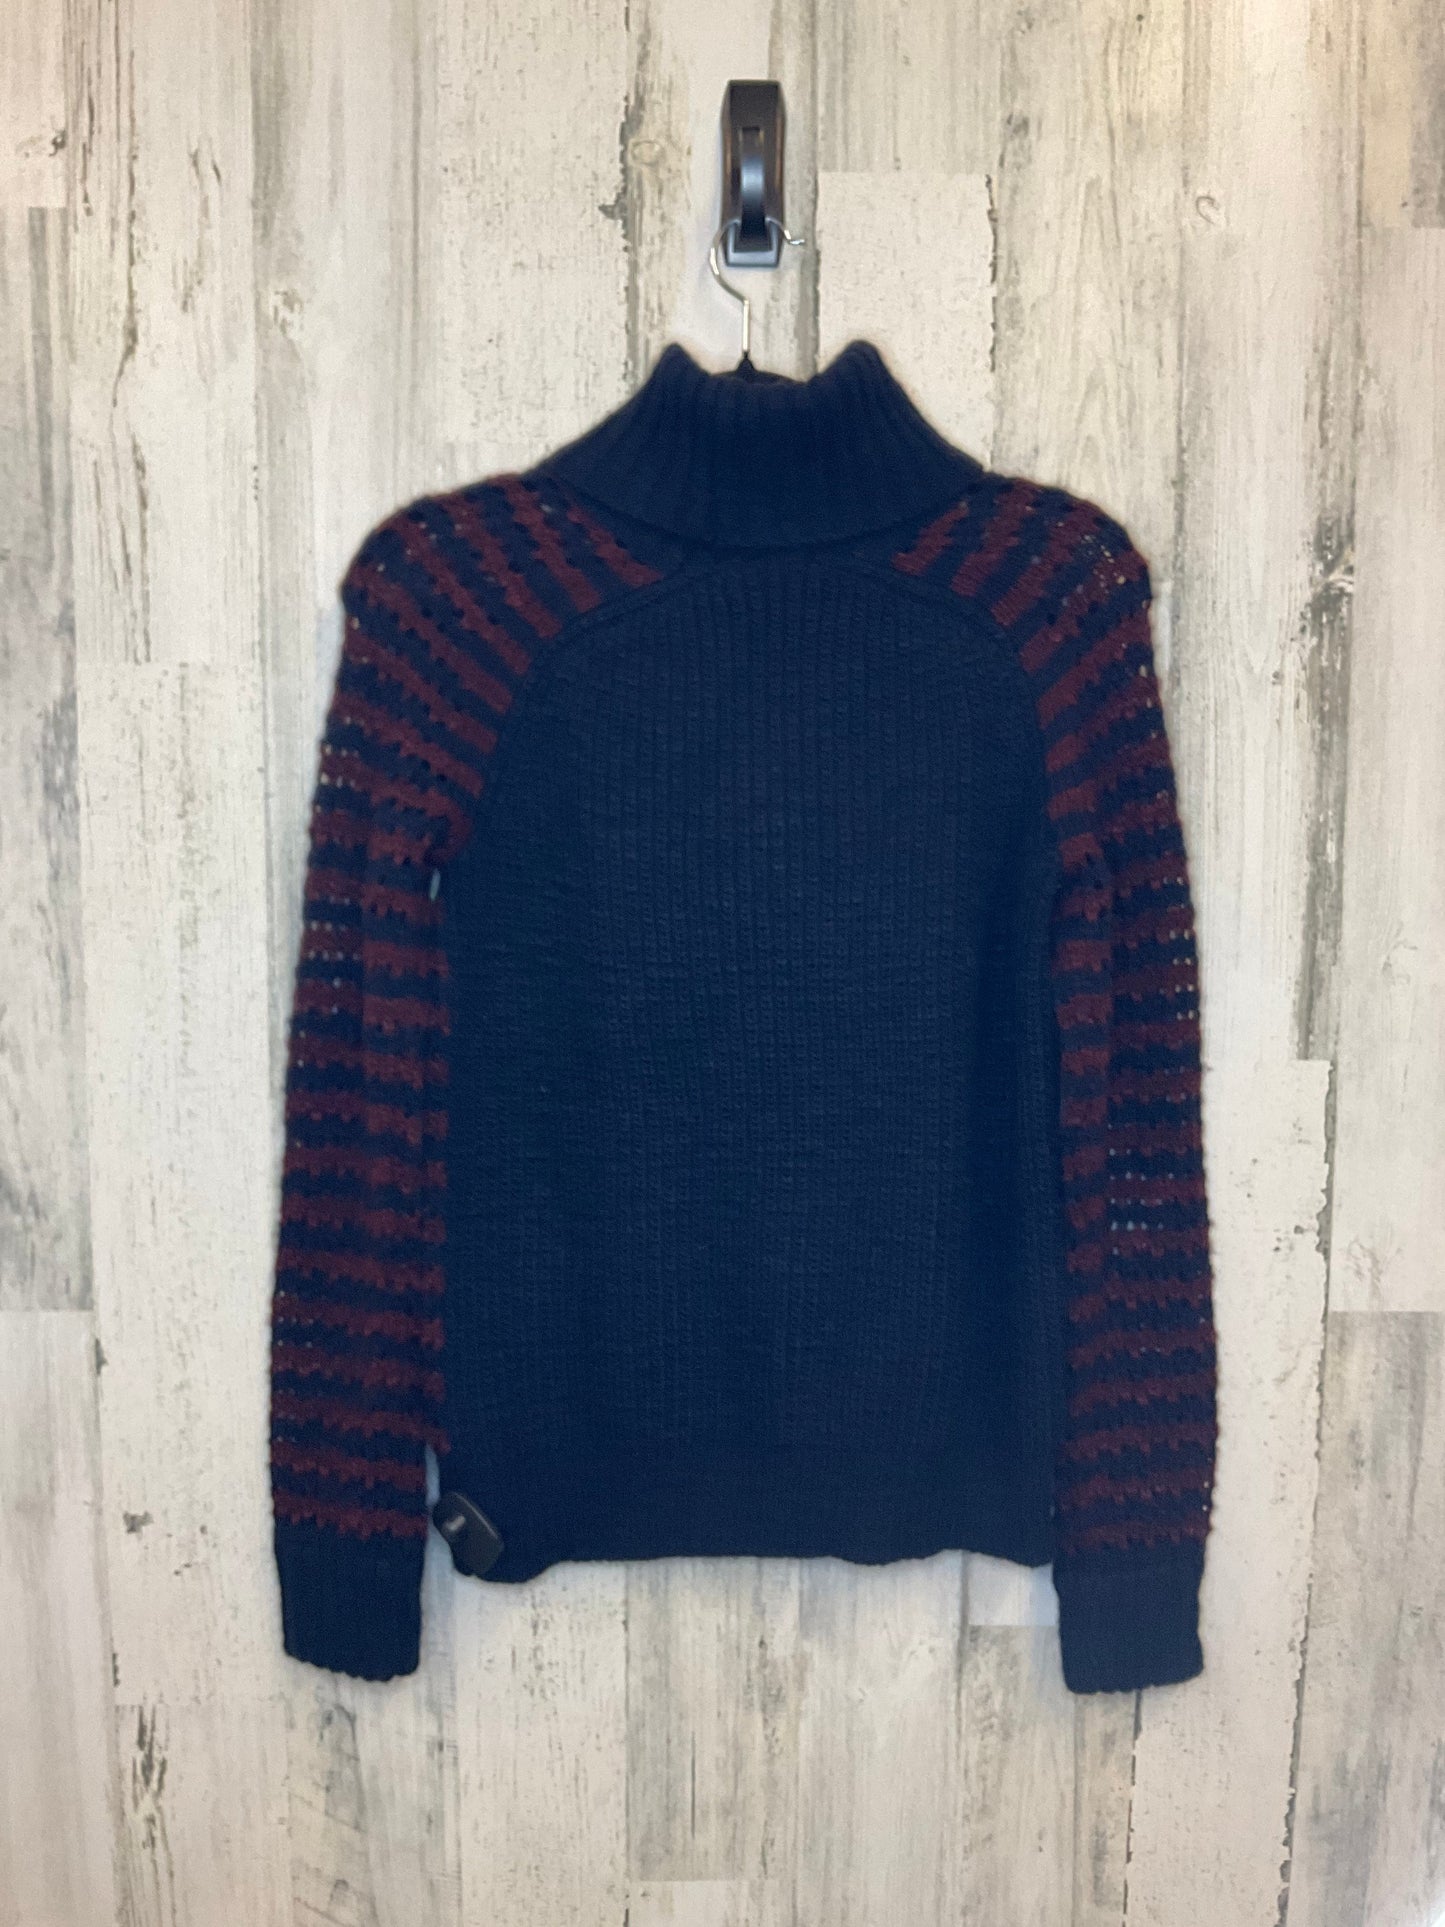 Sweater By Tory Burch  Size: S